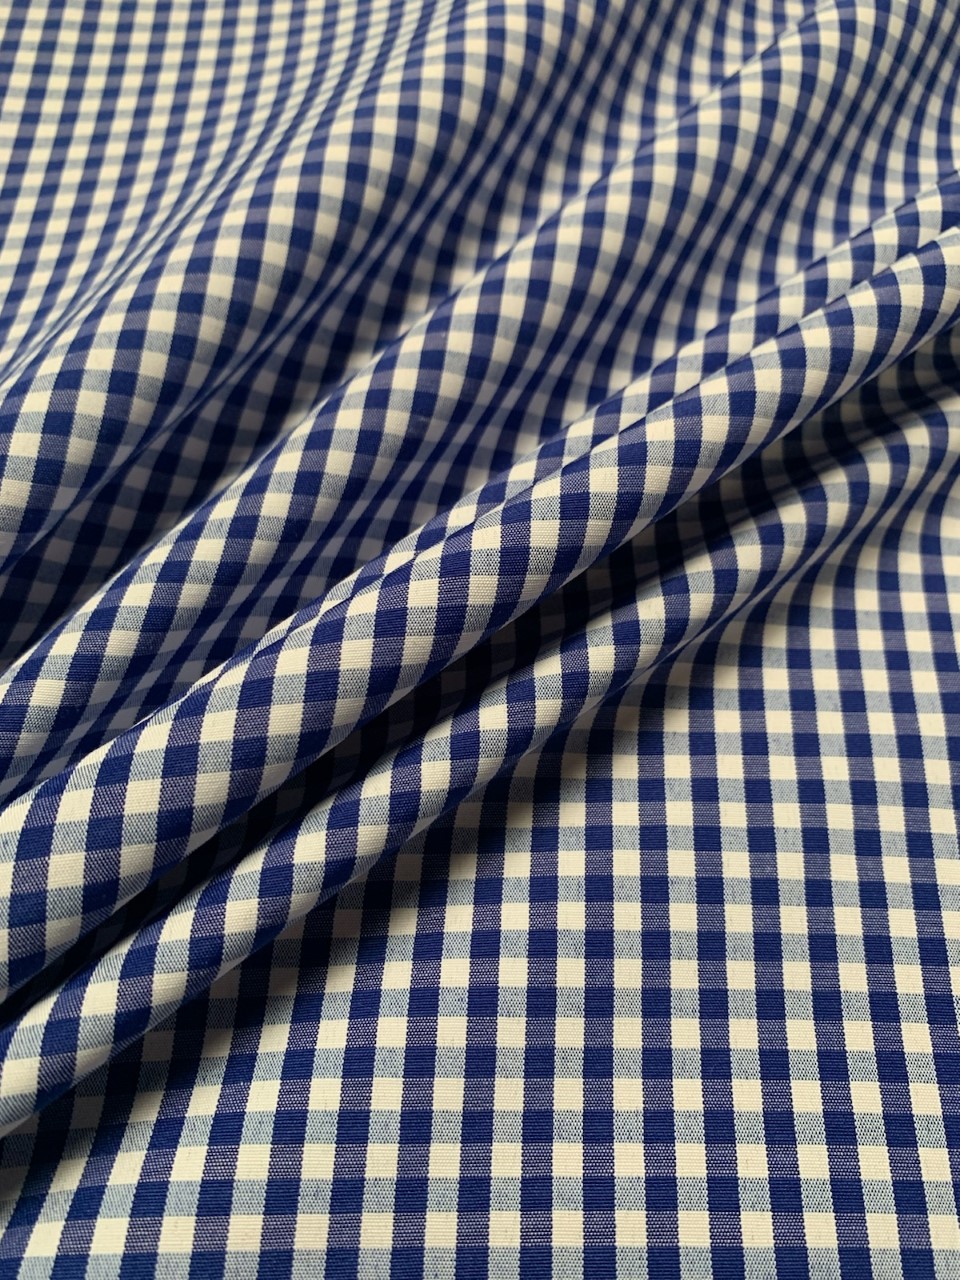 1/8" Royal Gingham Fabric 60" Wide By The Yard Poly Cotton Blend